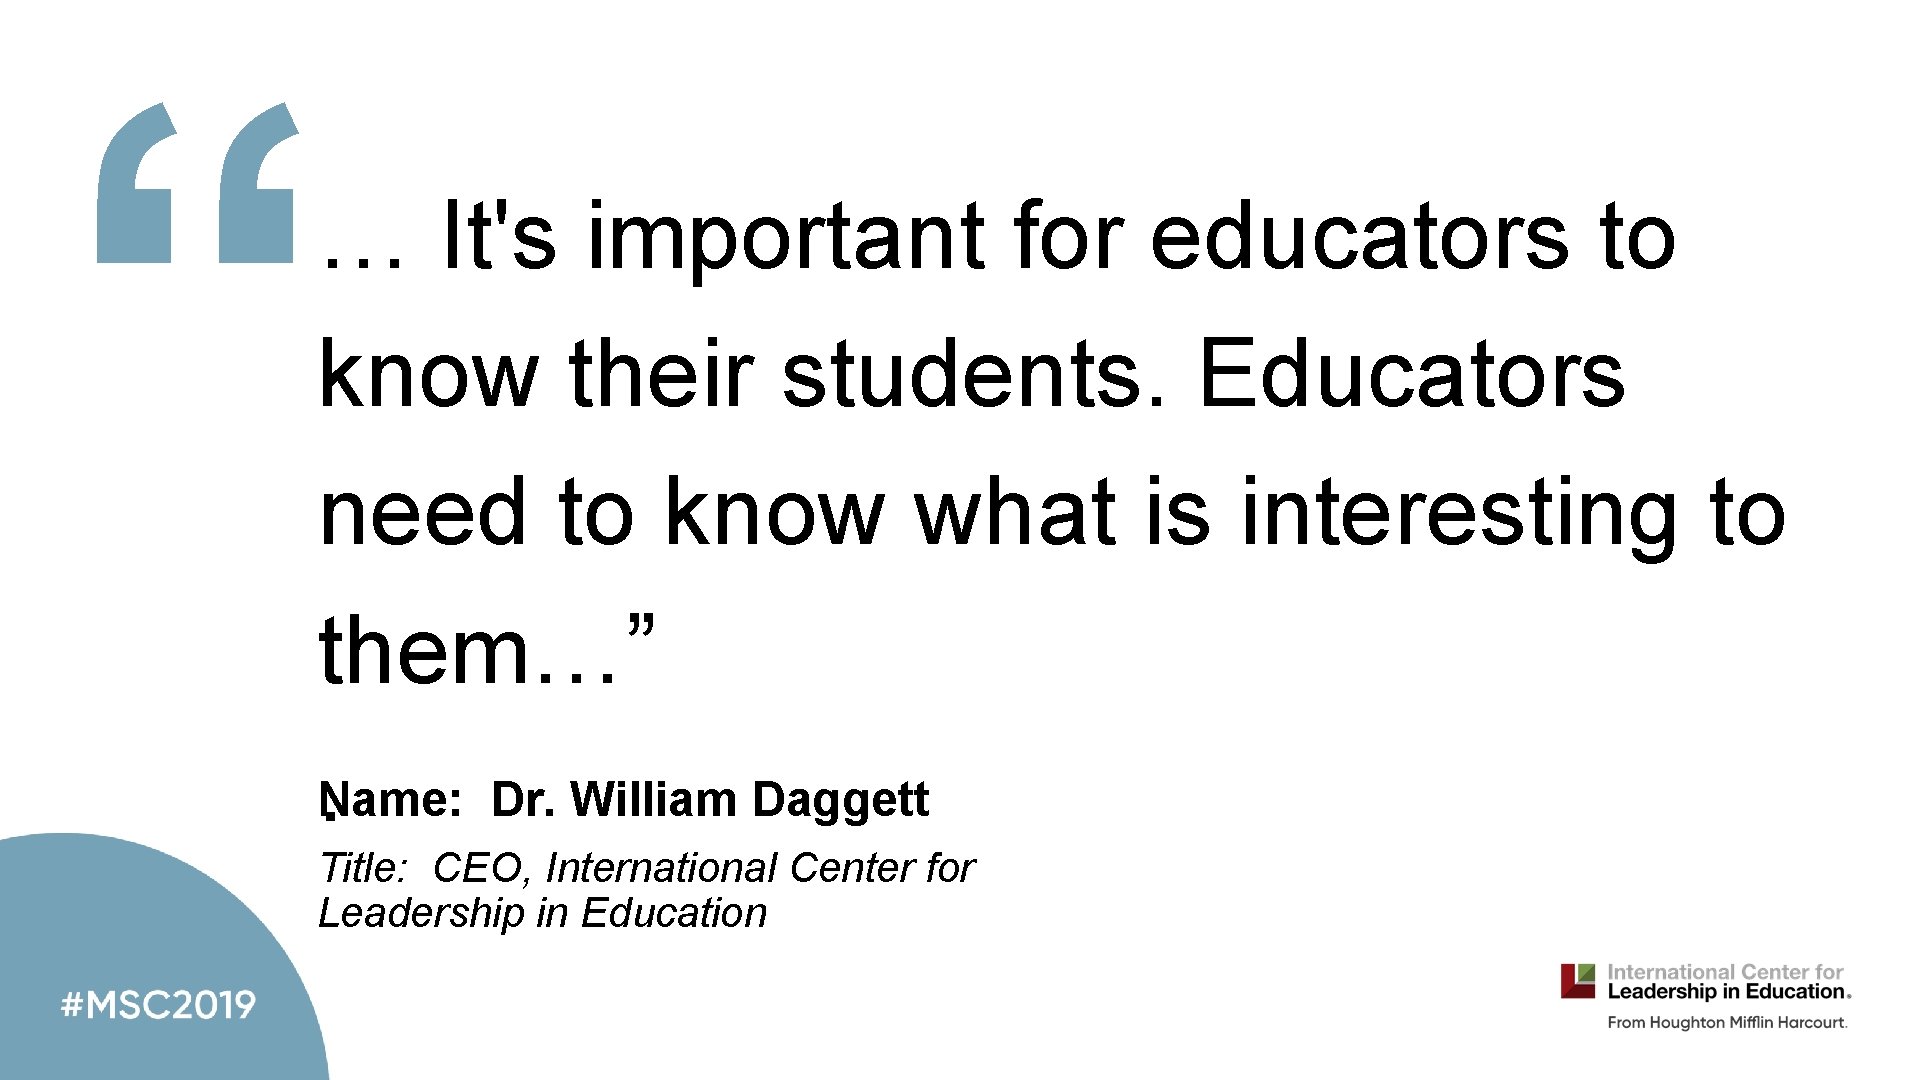 “ … It's important for educators to know their students. Educators need to know